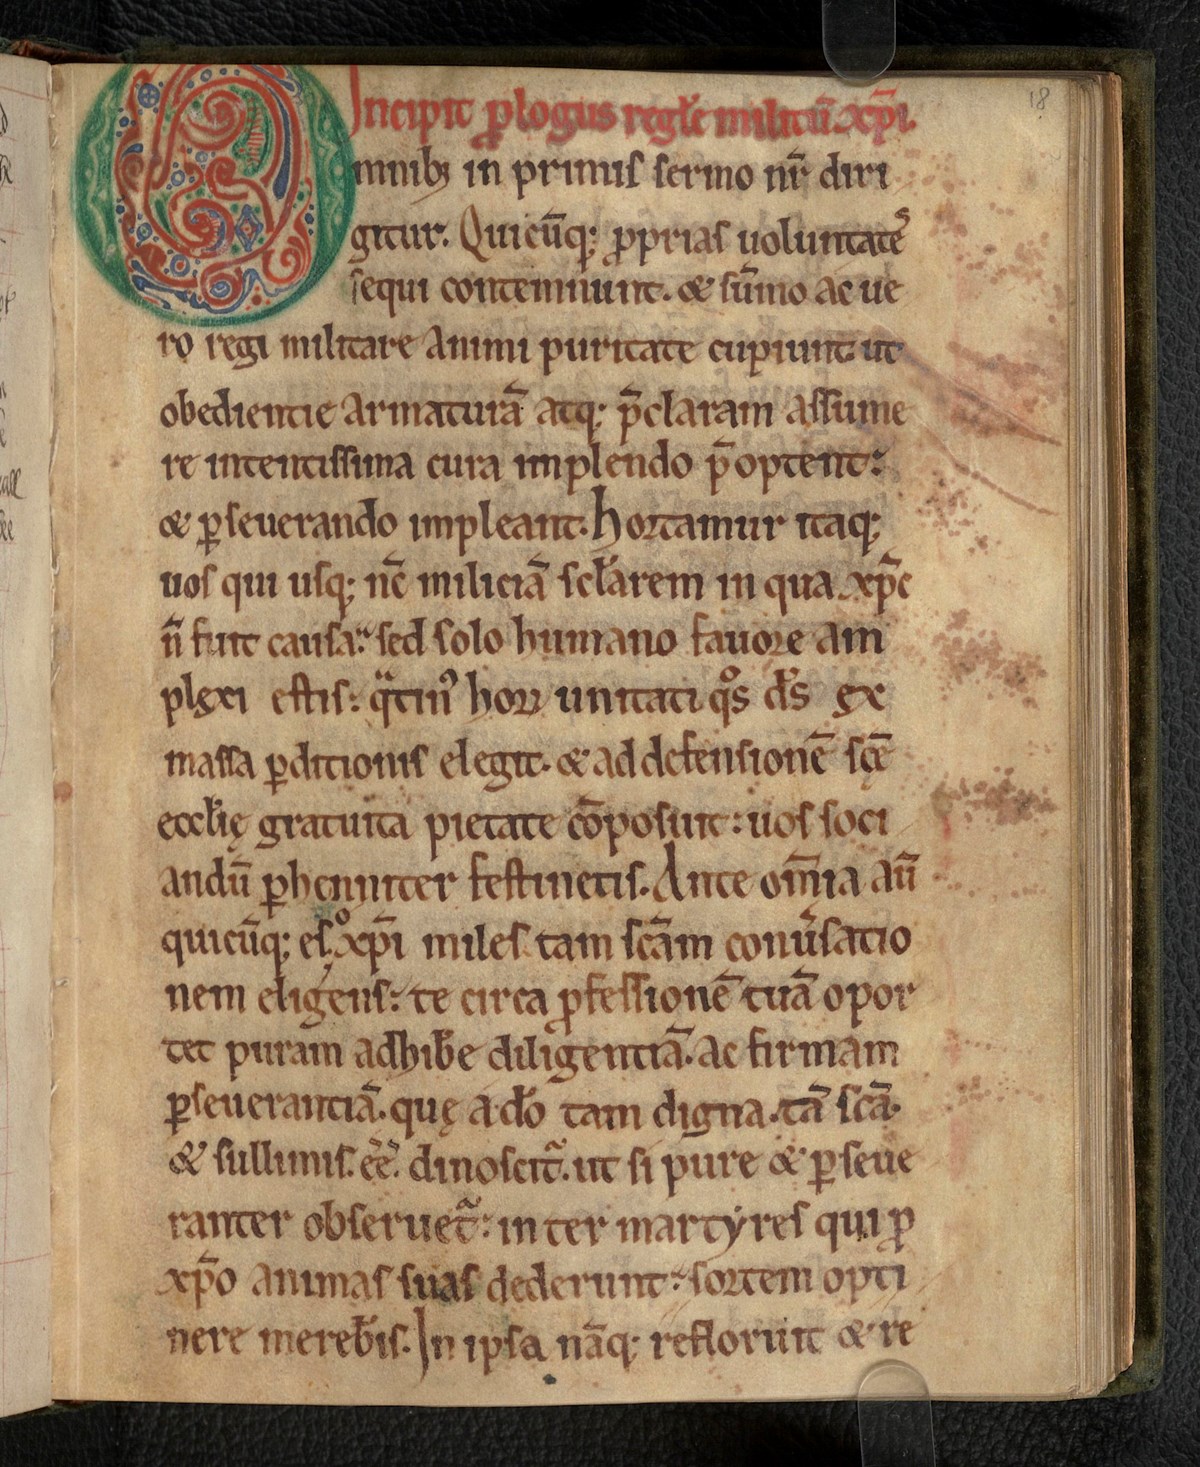 This colourful manuscript of the rule of the Templar order was probably written in England in the 12th century. It gives the original 12th-century Latin version of the rule. The knights' code of conduct is set out in interesting detail. The order was dissolved in 1312.